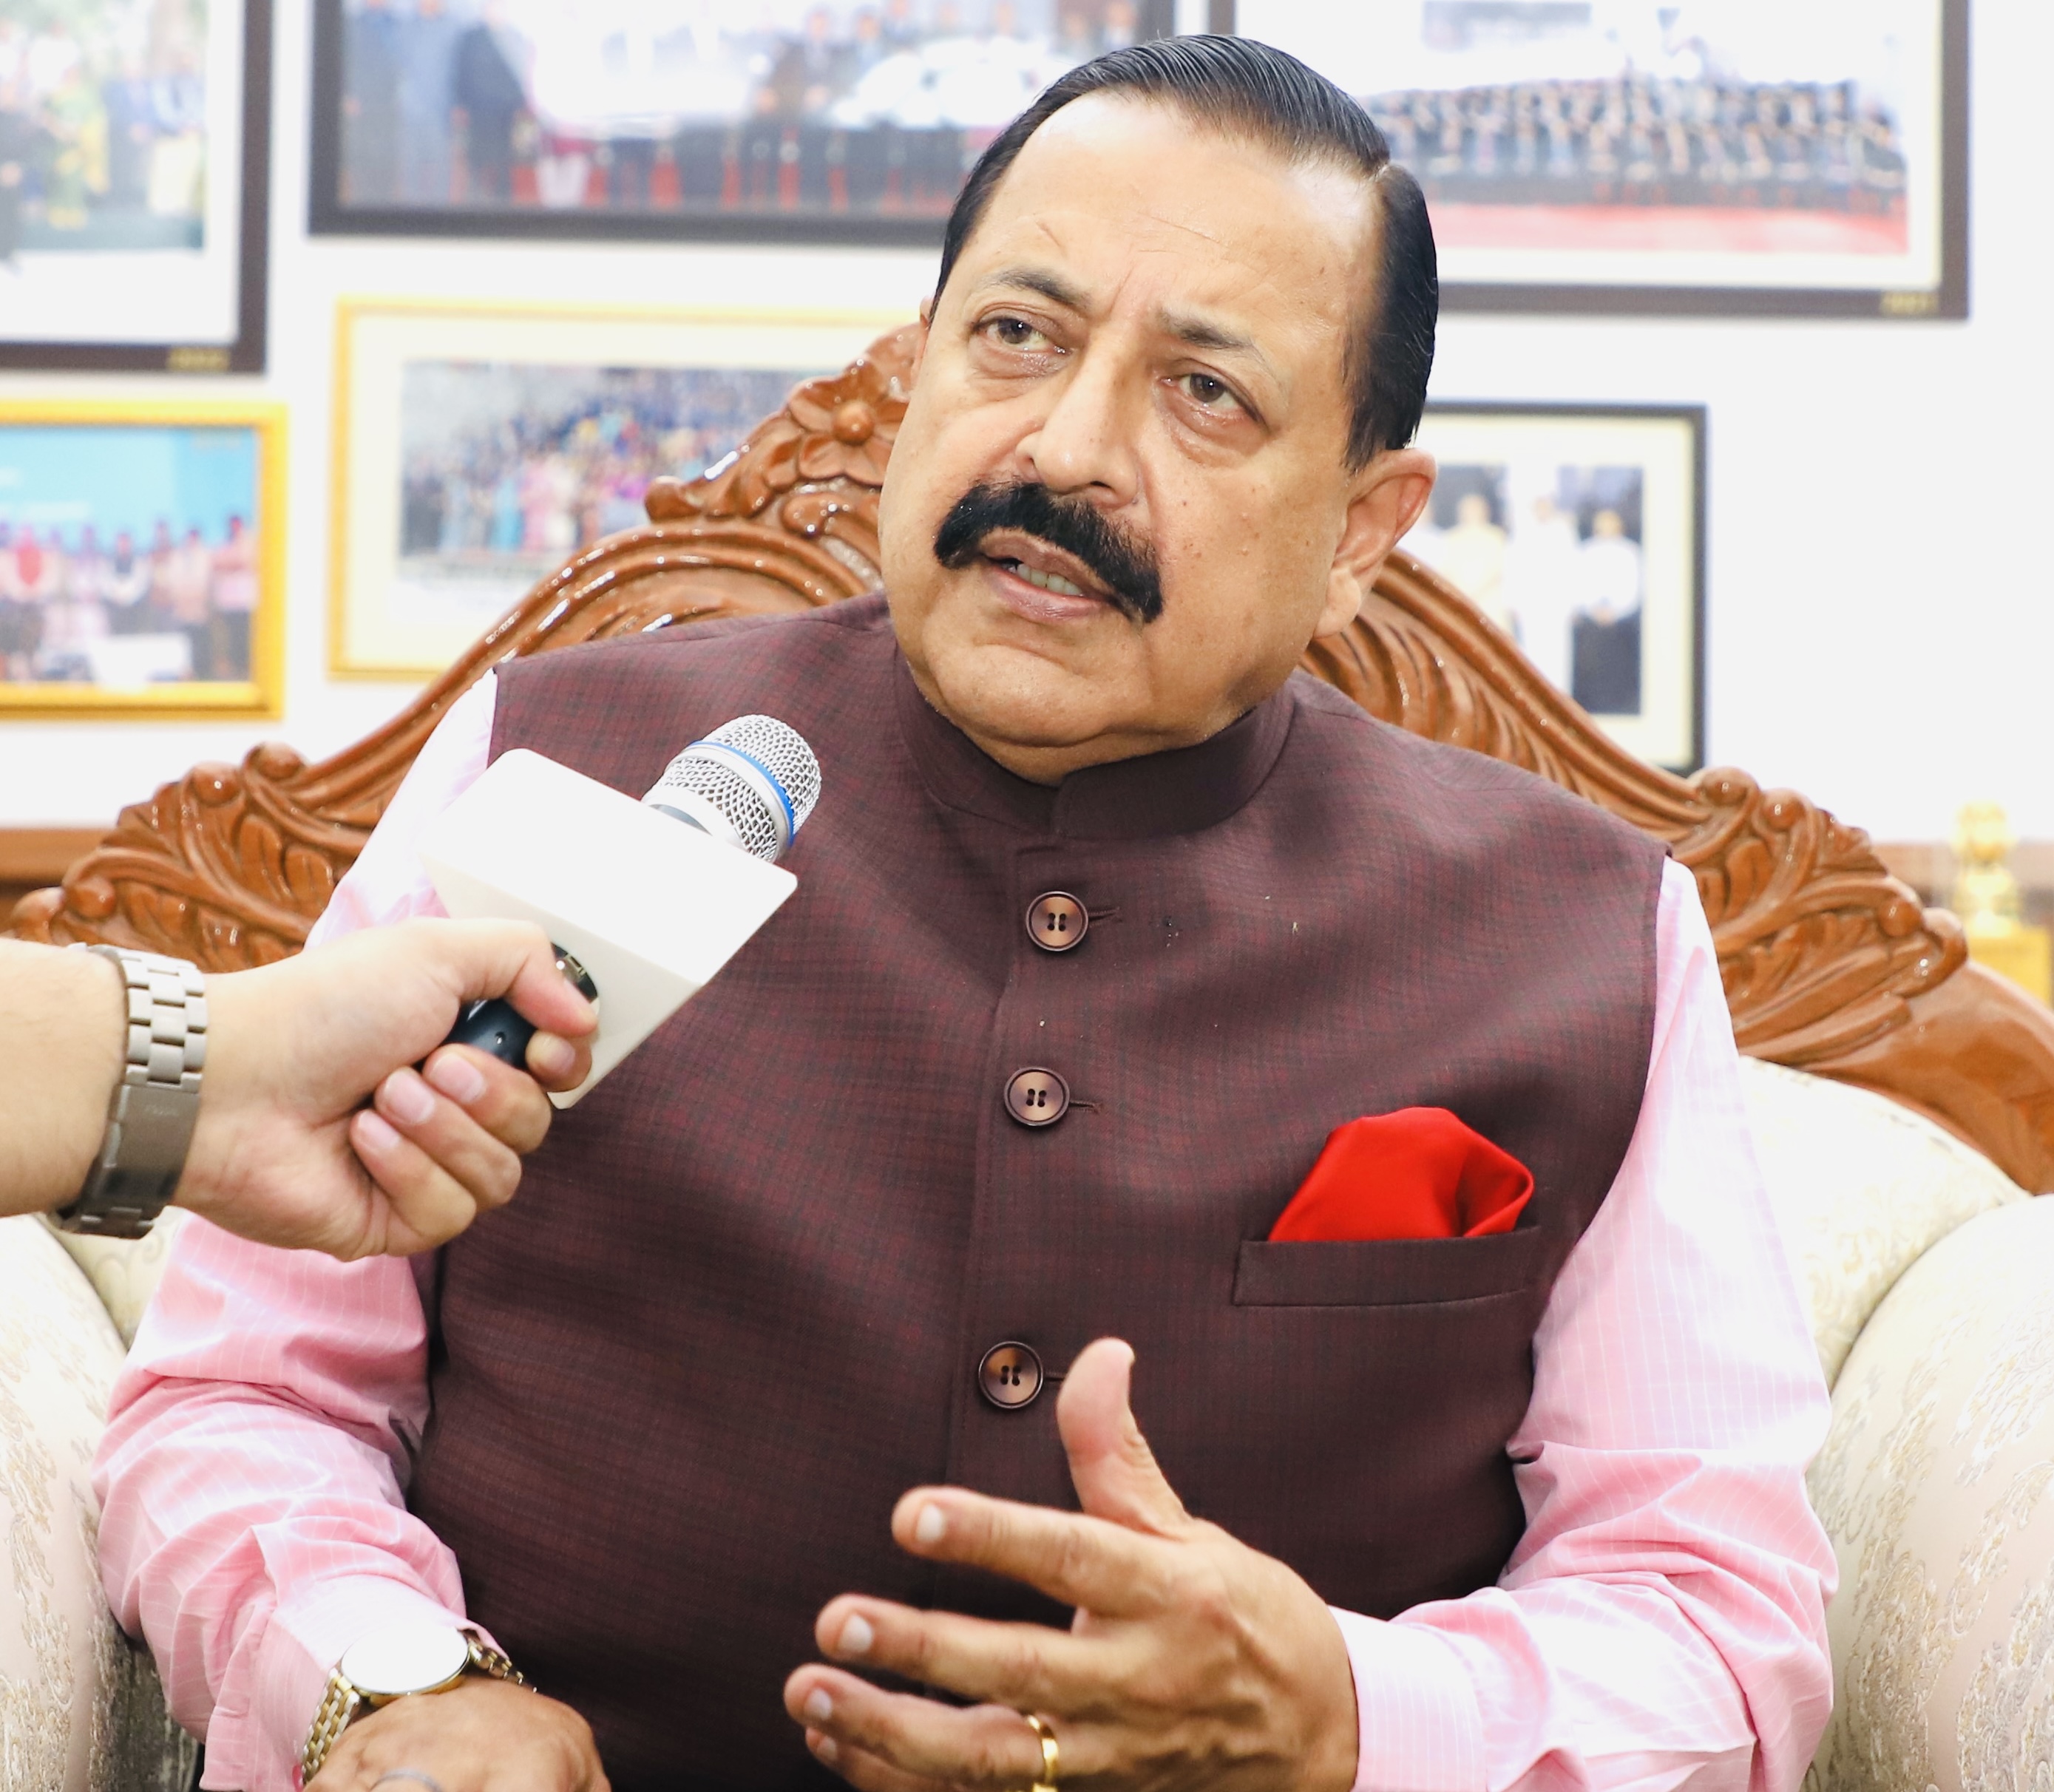 Test flight success of Abort Mission-1 (TV-D1) heralds successive sequential trial flights before the final “Gaganyaan” launch, says Union Minister of State for Space, Dr Jitendra Singh